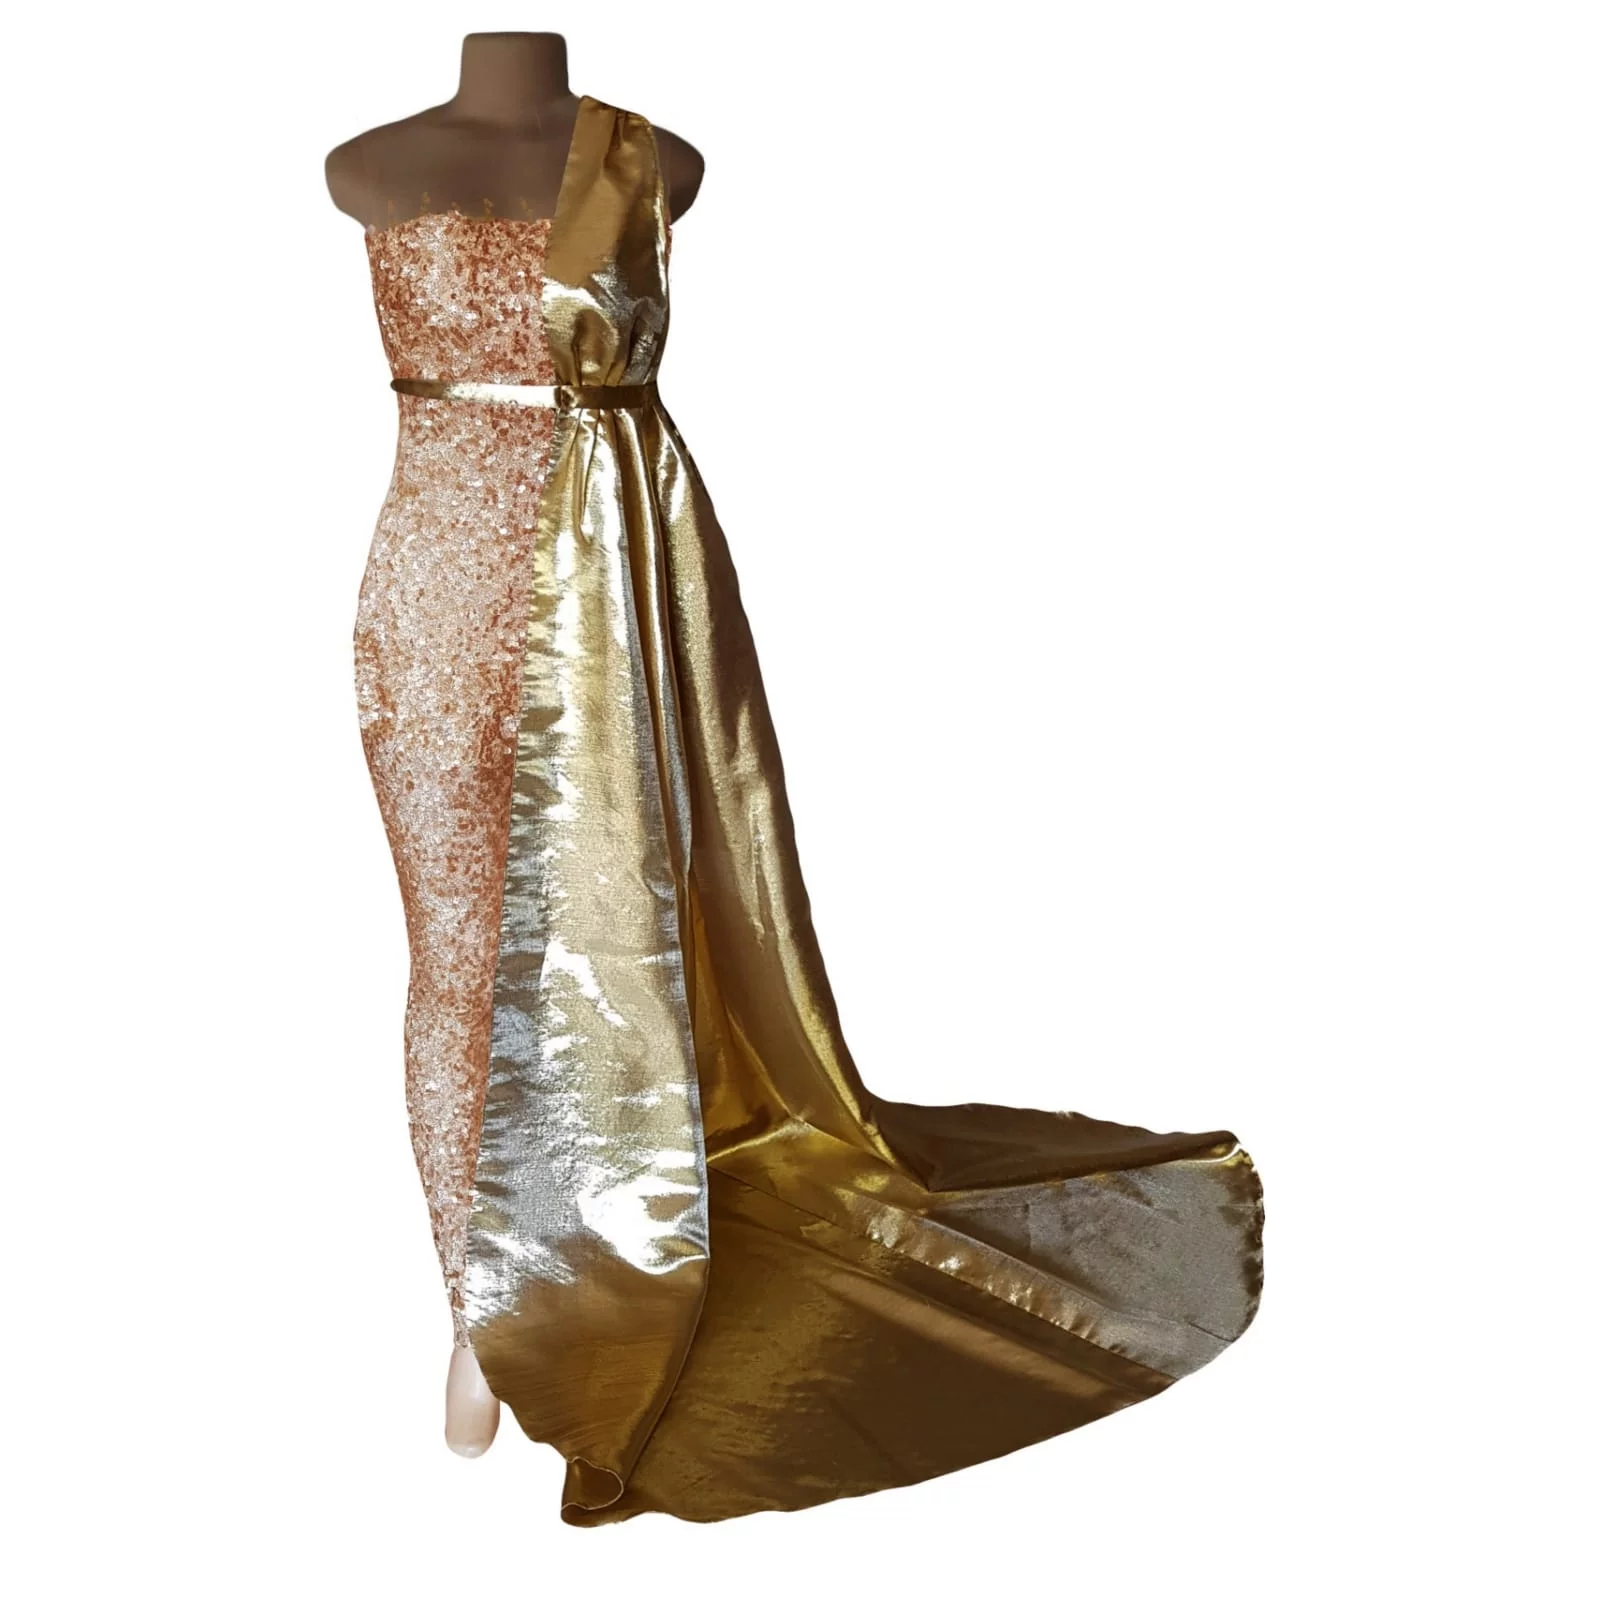 Gold sequins evening wear bodysuit 4 gold sequins evening wear bodysuit with an illusion neckline and sleeves, detailed with gold beads. With a long and short leg. Detachable side gold train.